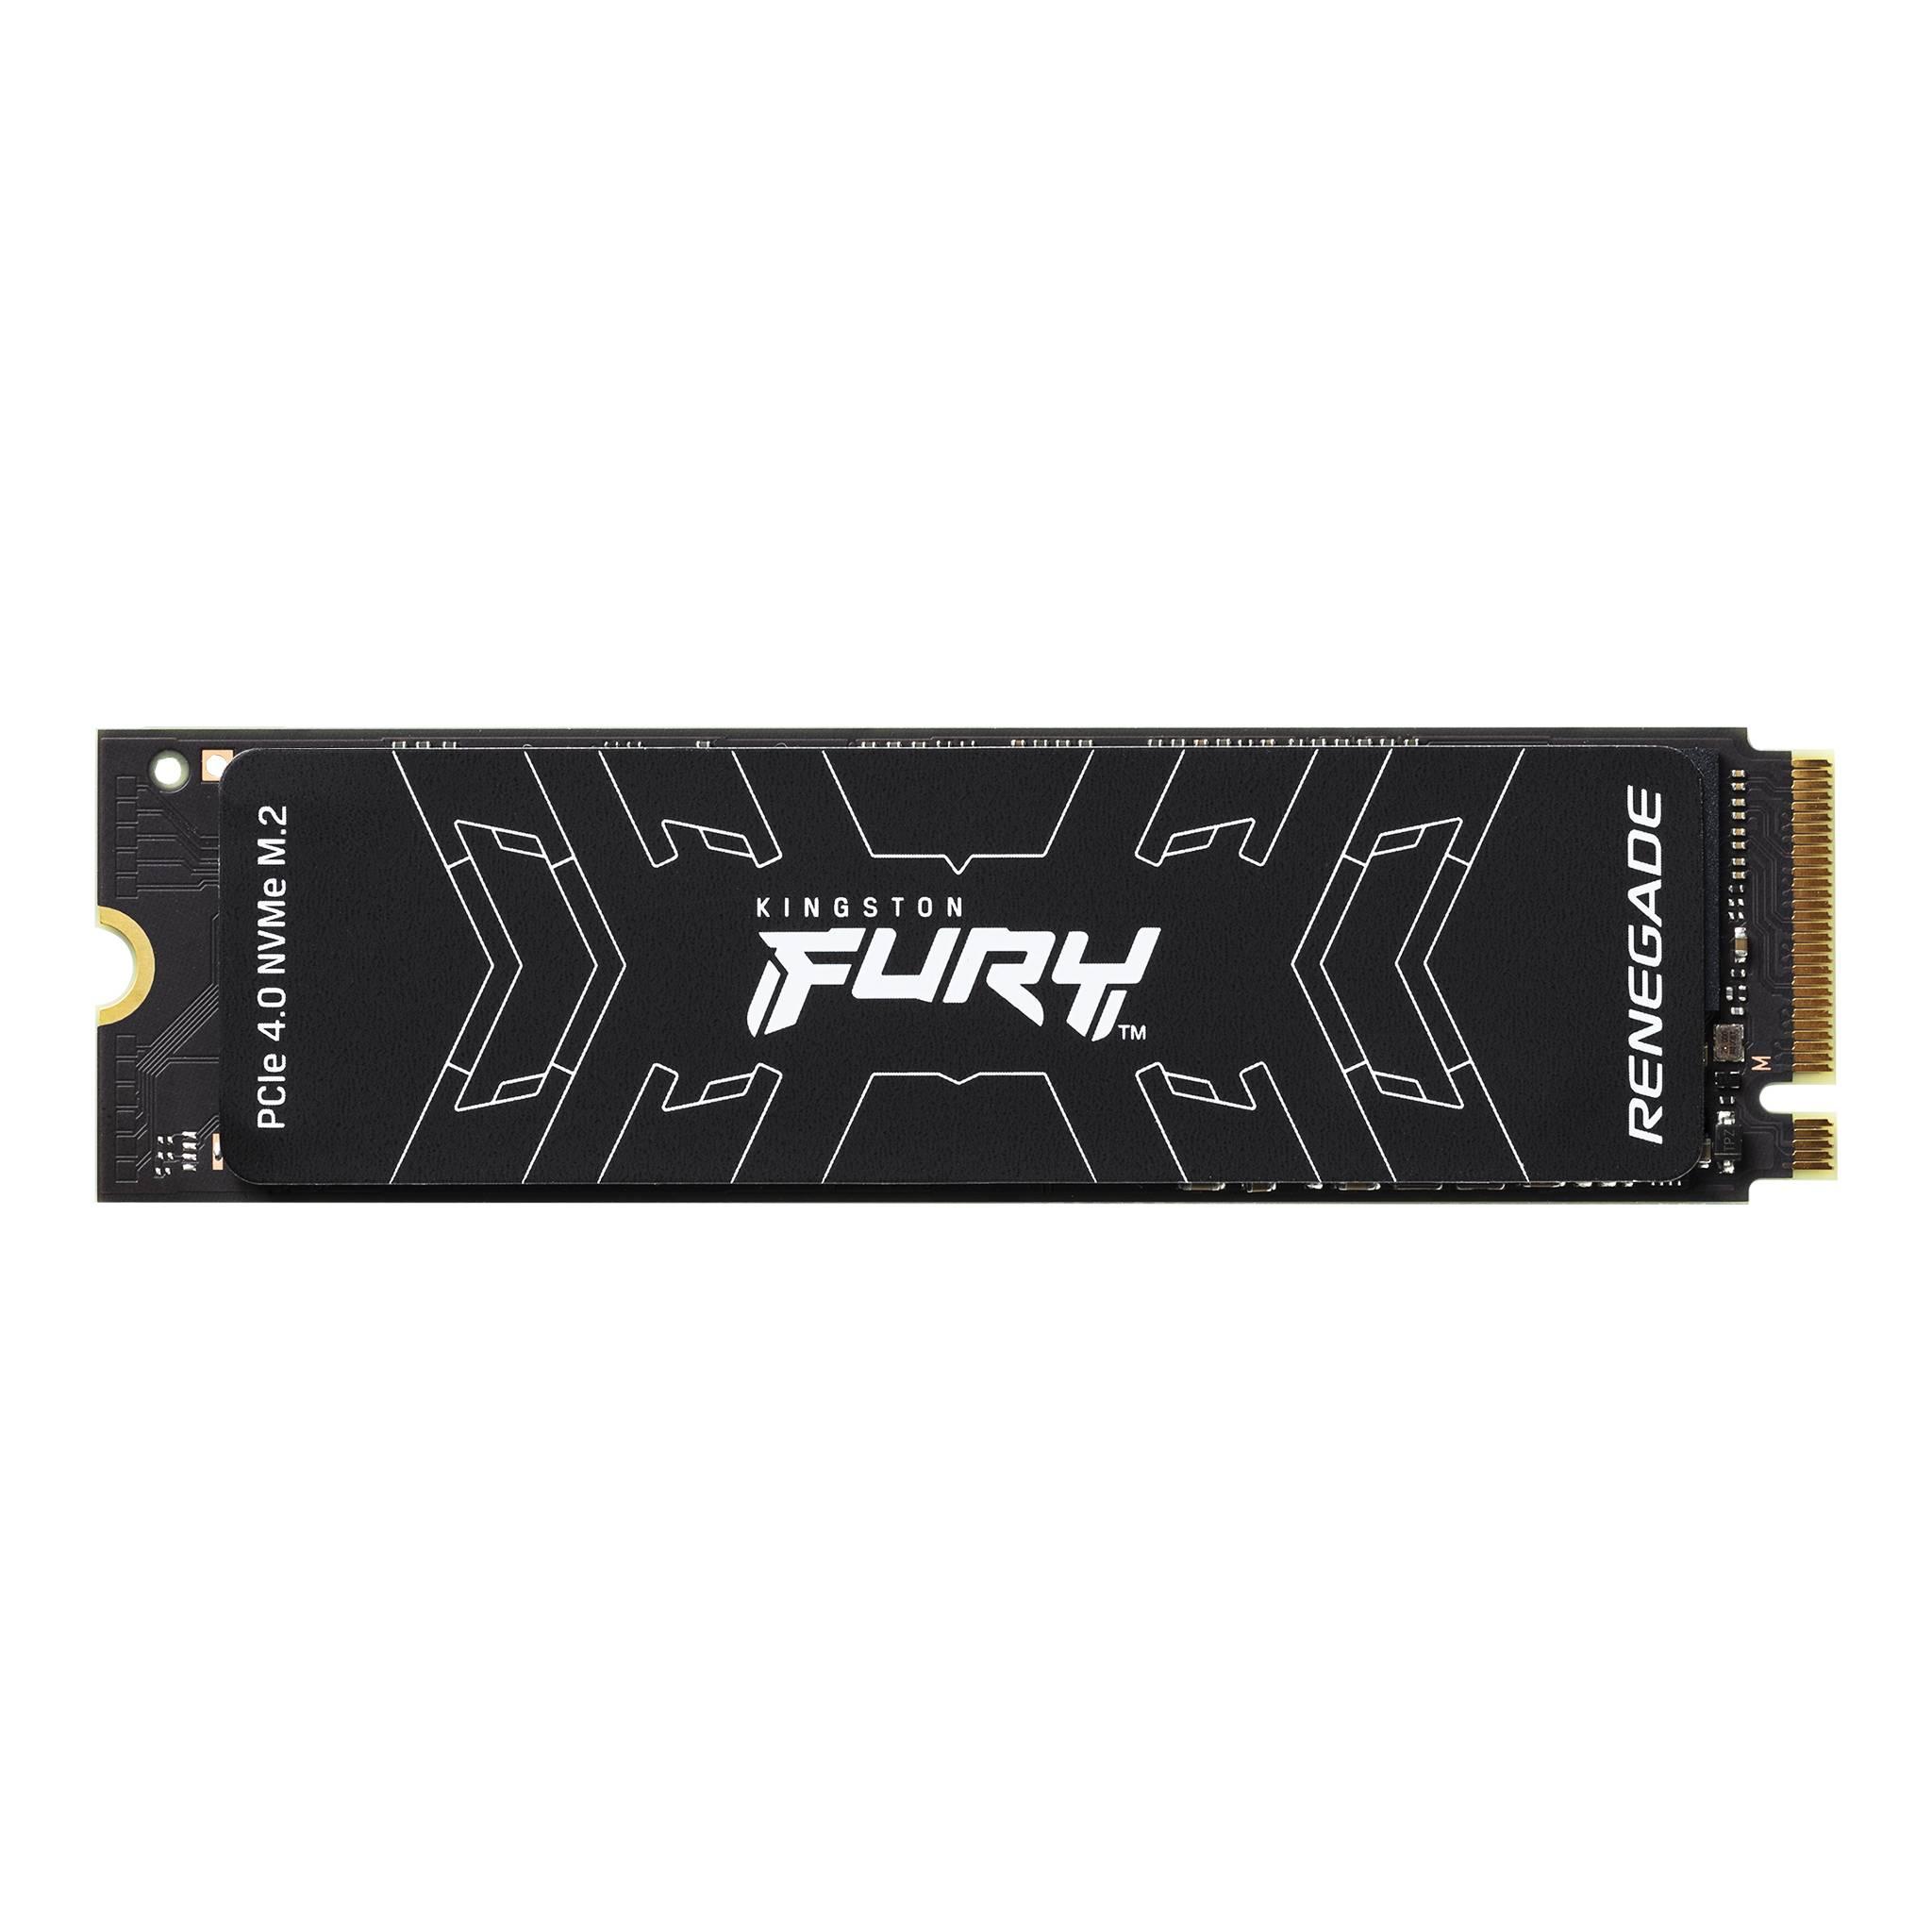 Solid State Drive (SSD) Kingston Fury Renegade M.2-2280 PCIe 4.0 NVMe 500GB